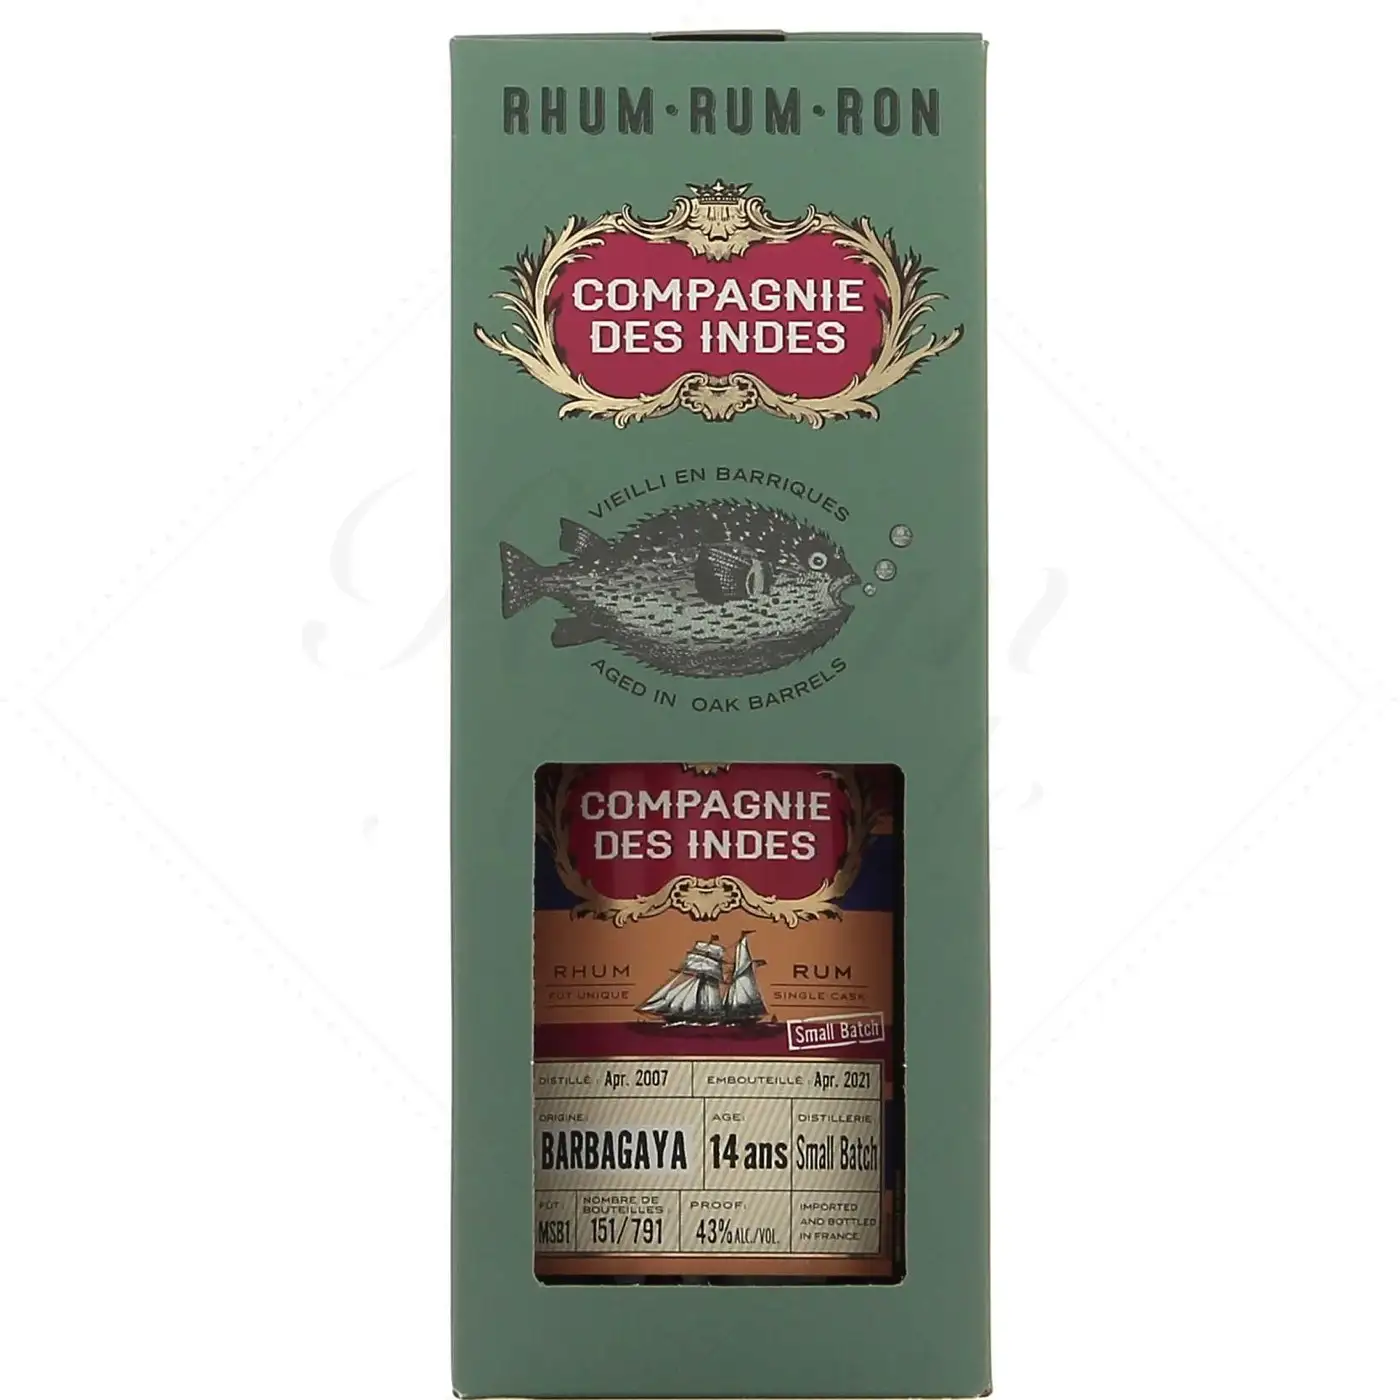 Image of the front of the bottle of the rum Barbagaya